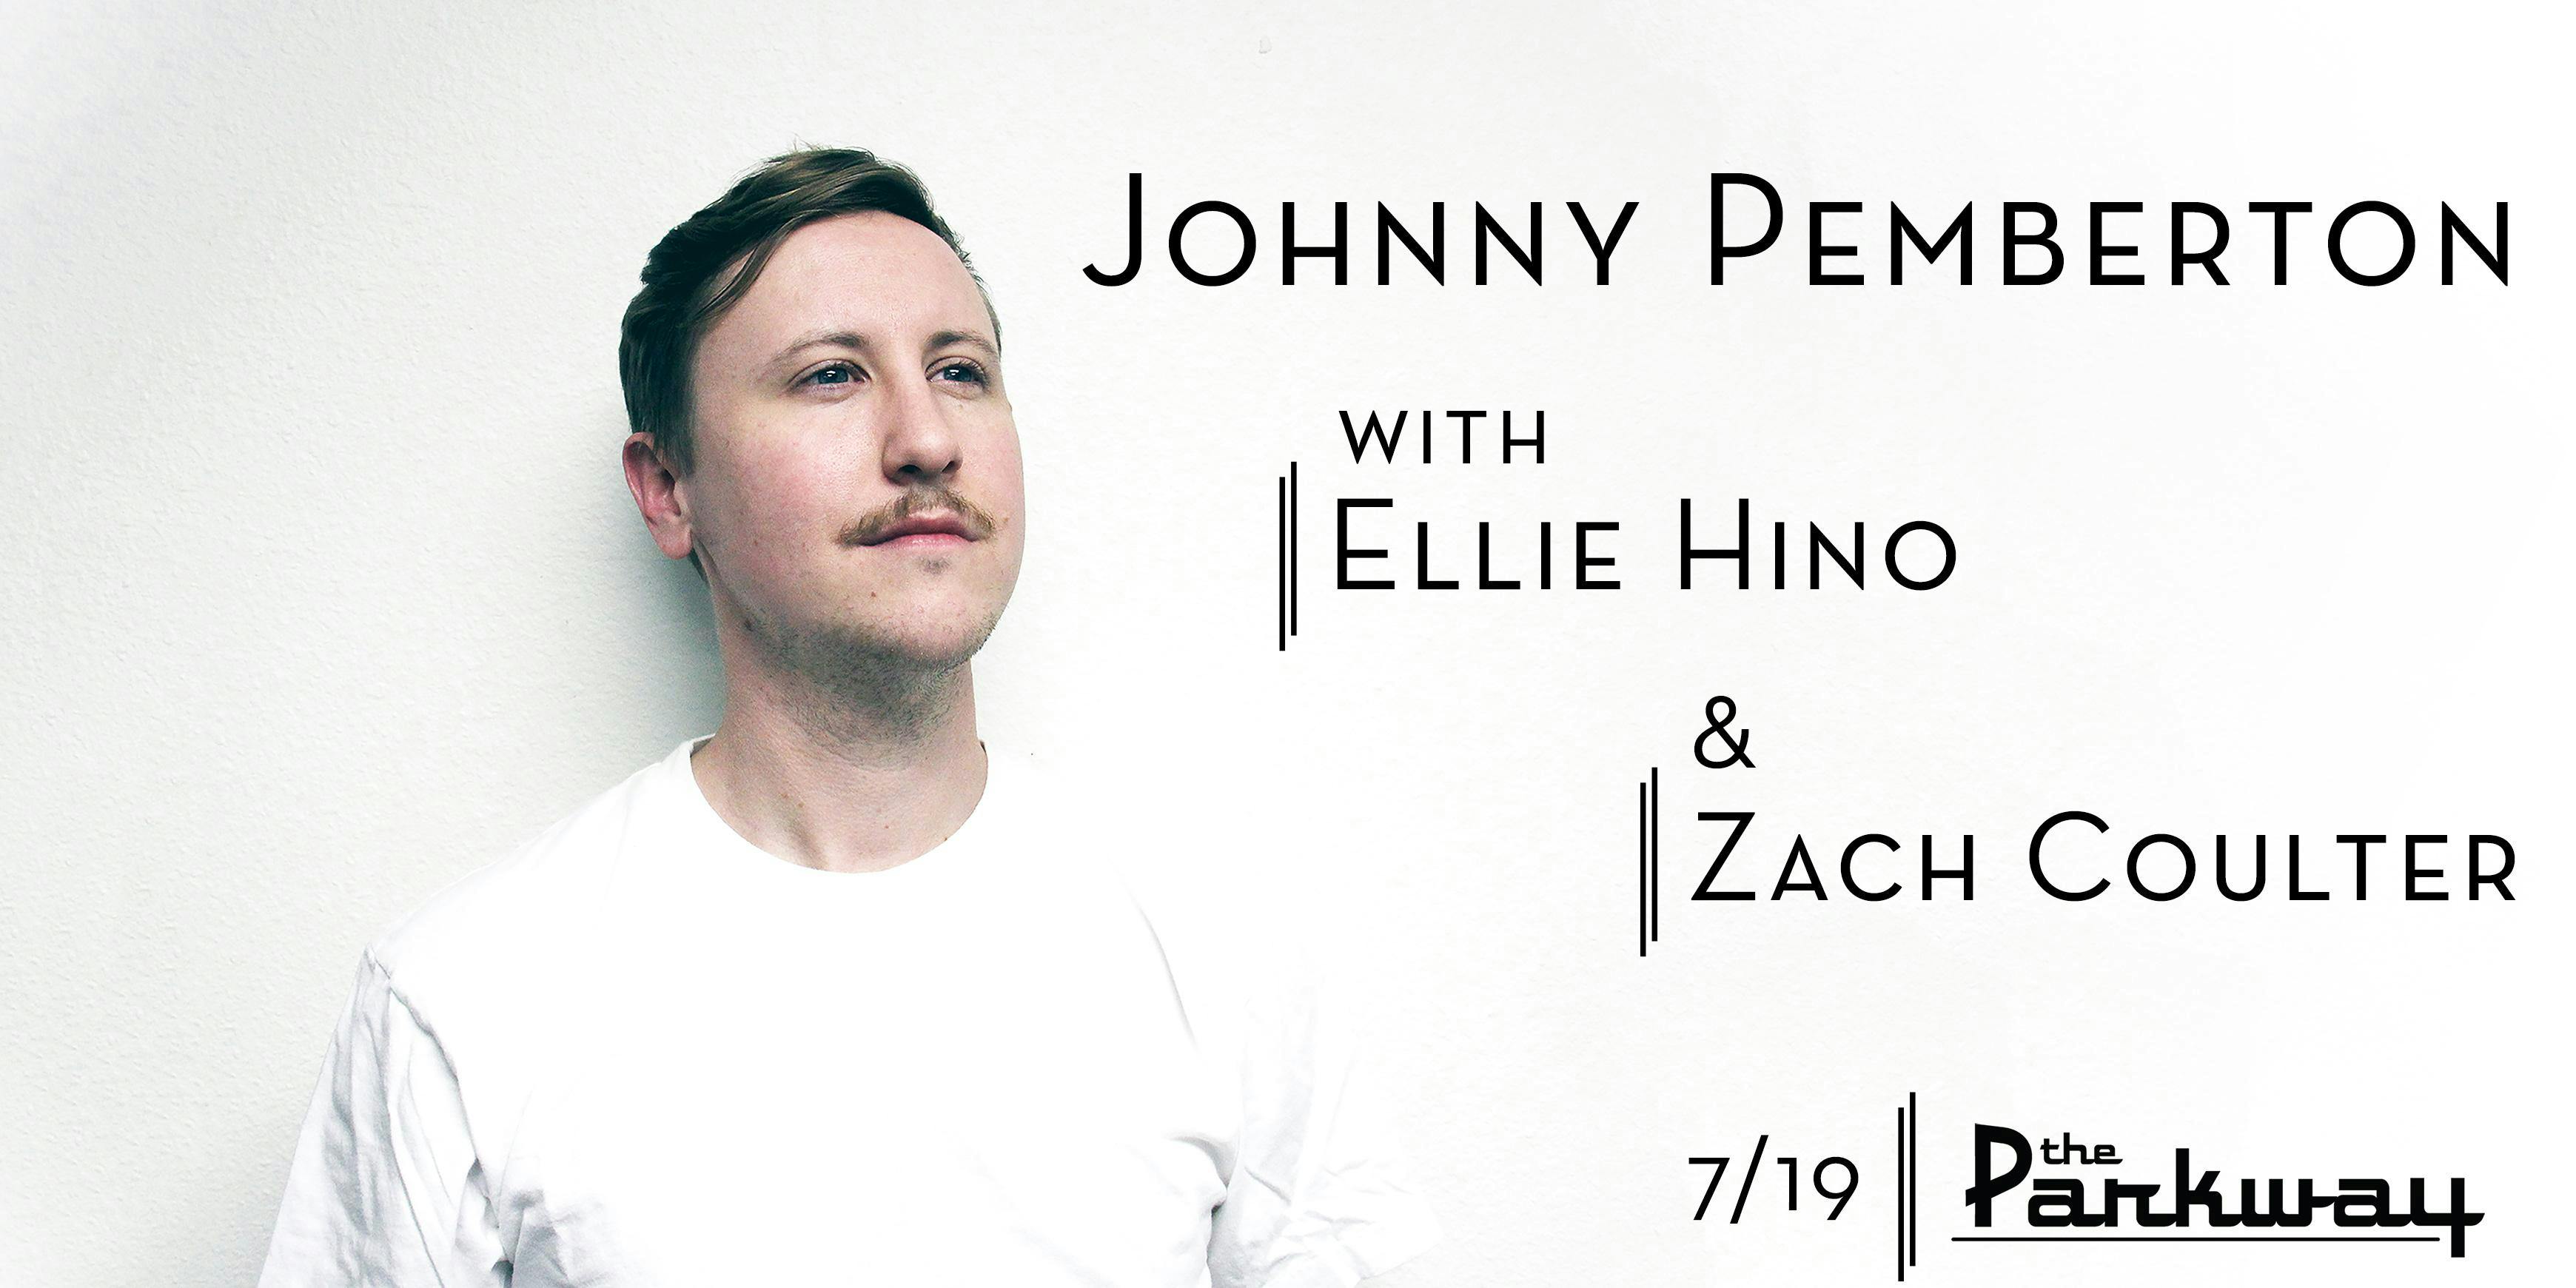 Johnny Pemberton with Ellie Hino & Zach Coulter // LIVE COMEDY!